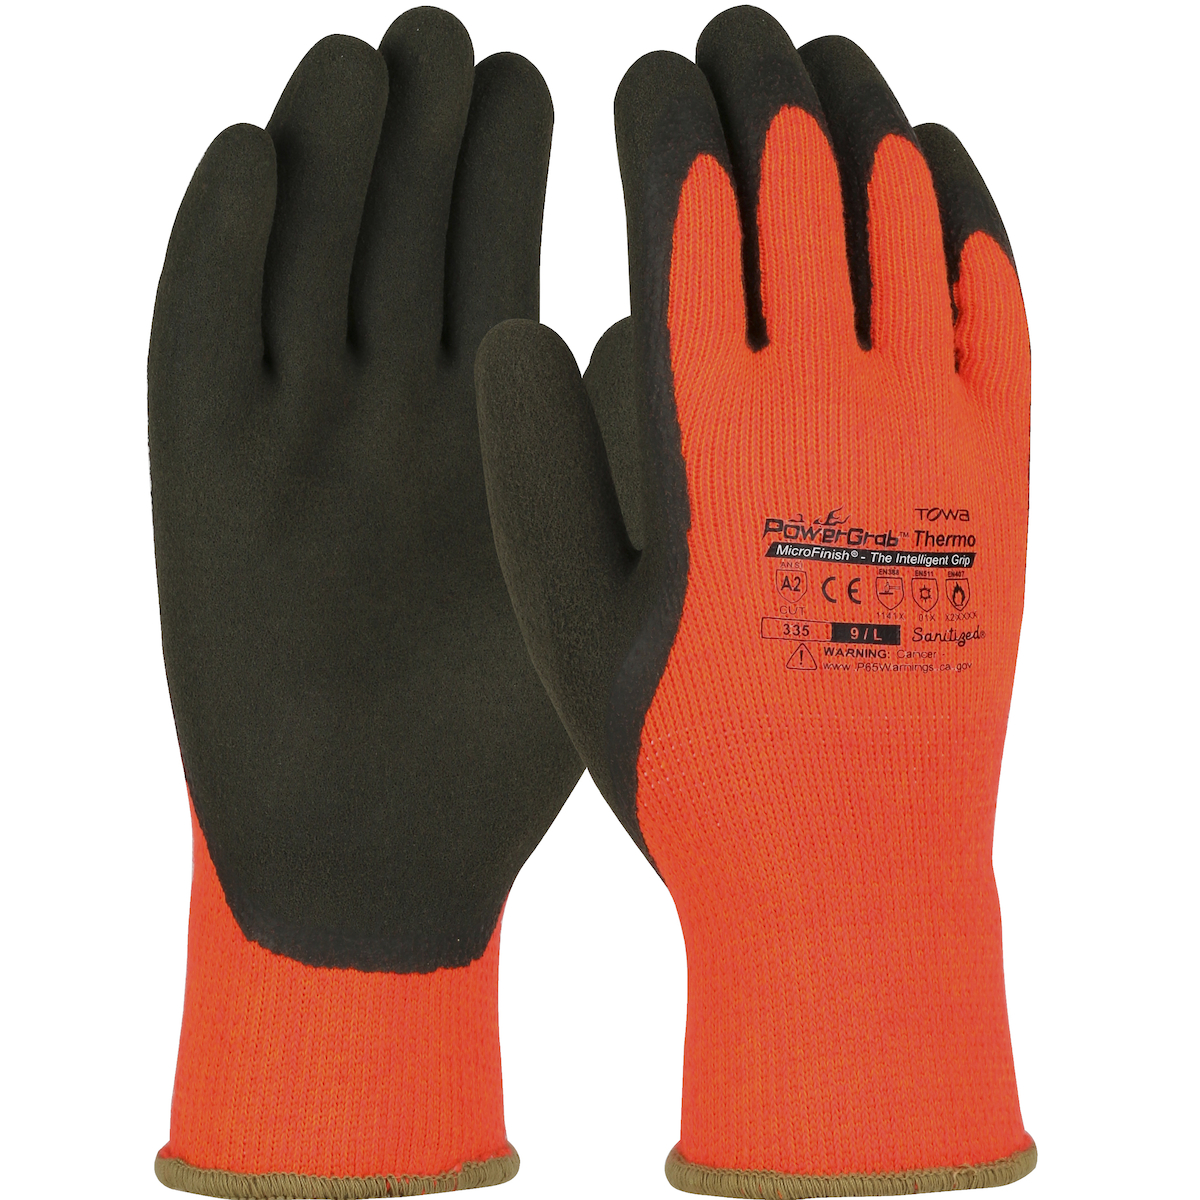 PowerGrab™ Thermo Glove - Spill Control